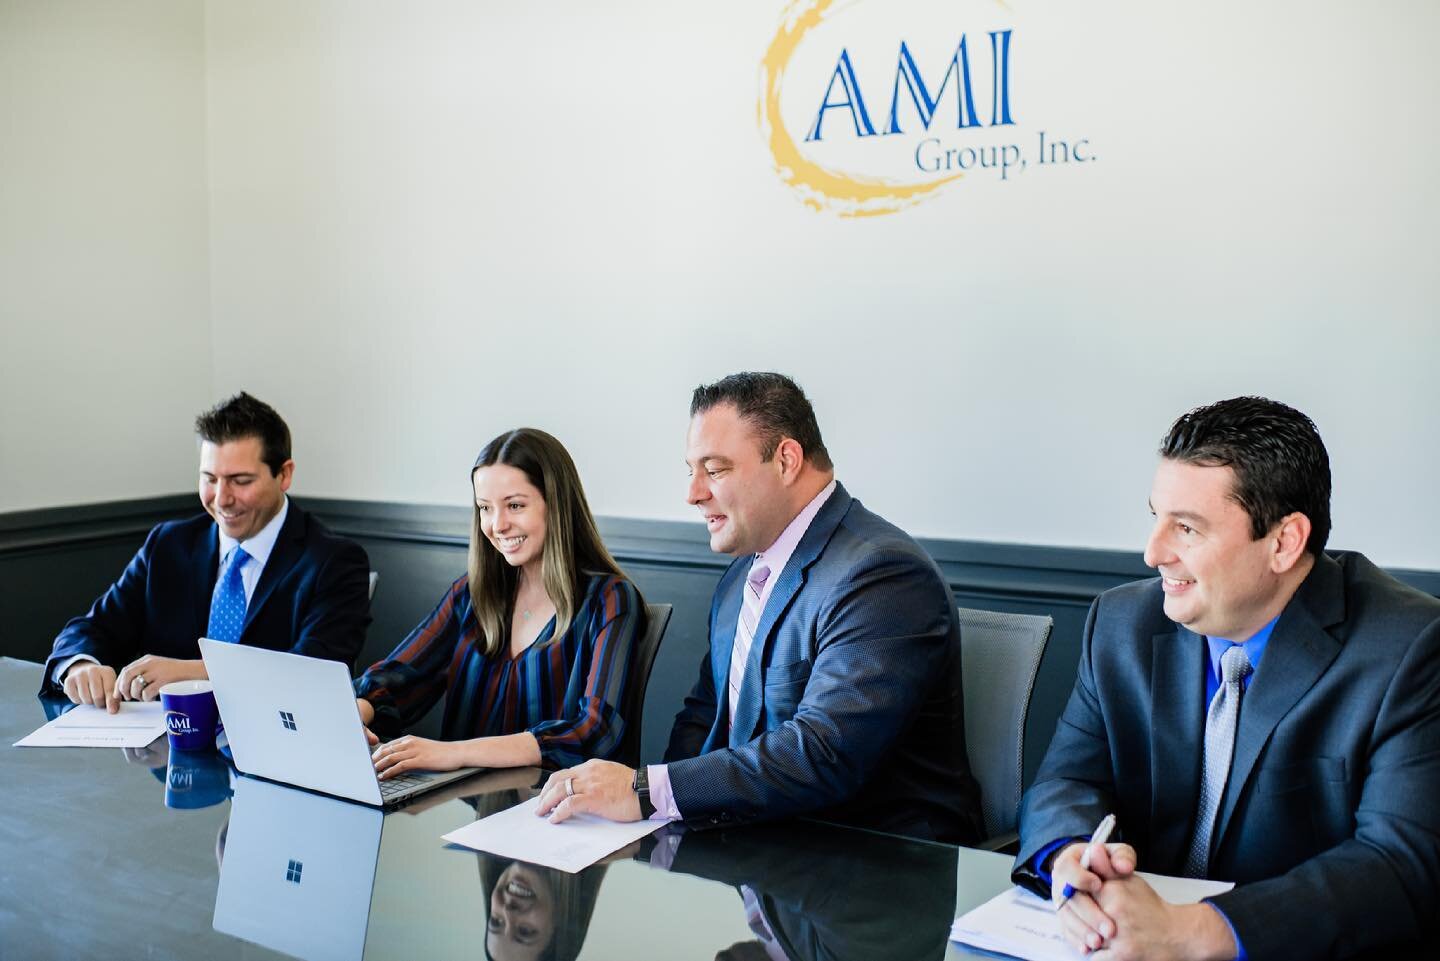 Working with AMI Group, Inc. is a game-changer for your business.

We provide a full range of brokerage and consulting services.

Coupled with our dedicated customer service team, we supplement all your insurance, human resource, compliance, safety, 